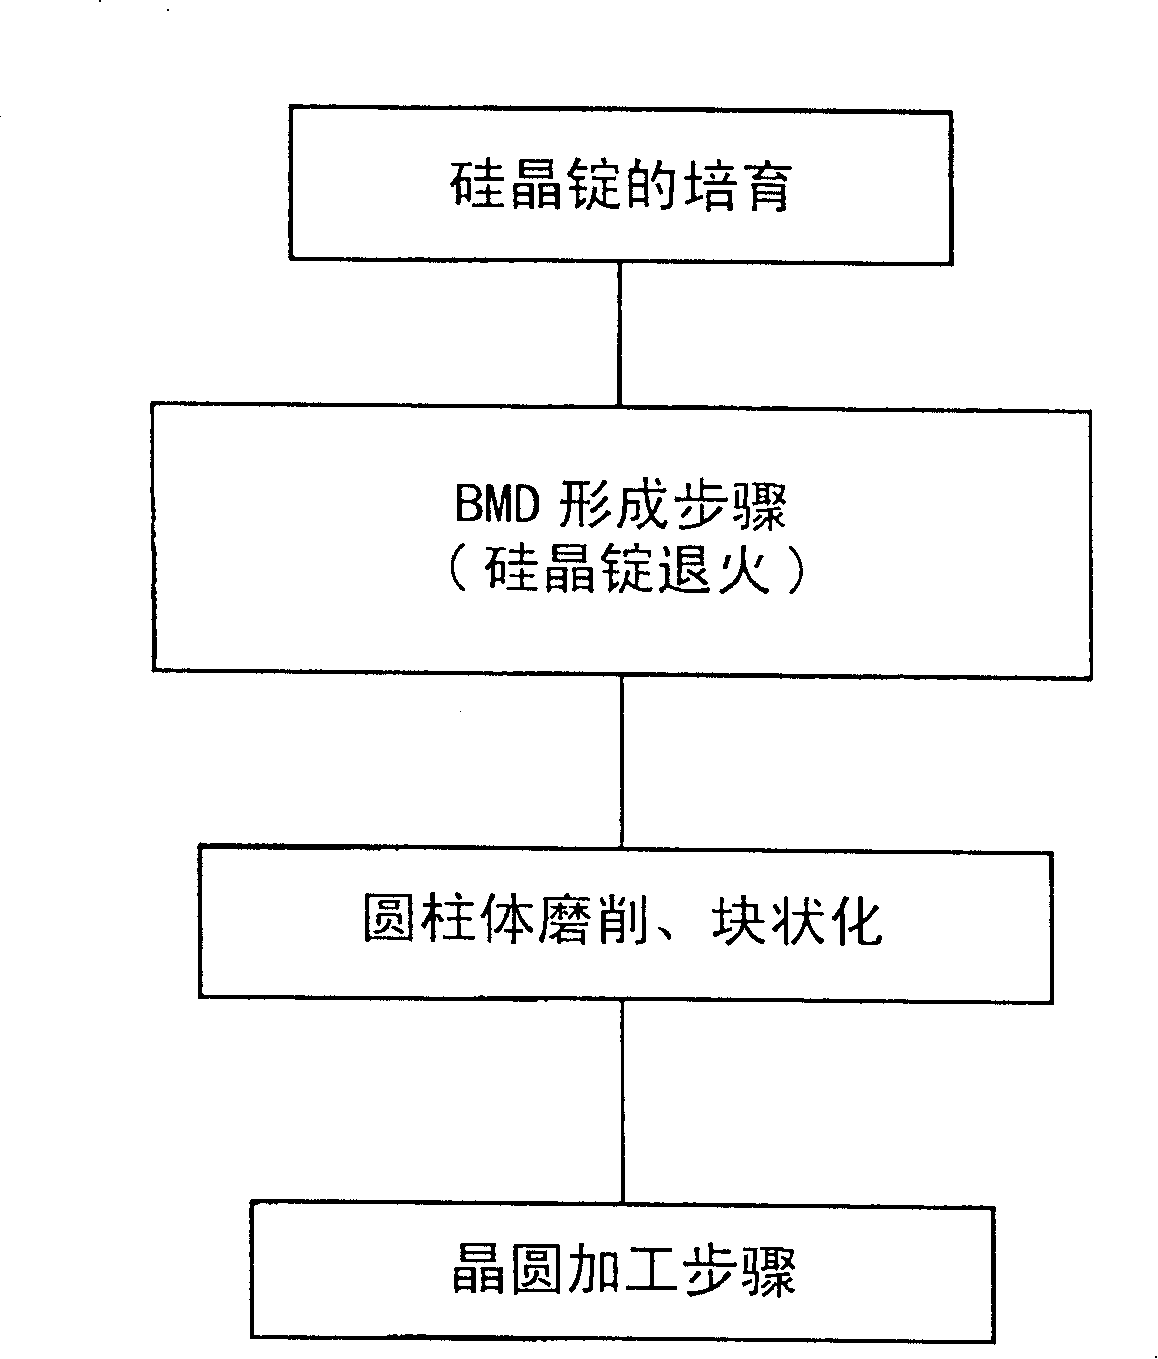 Process for producing wafer